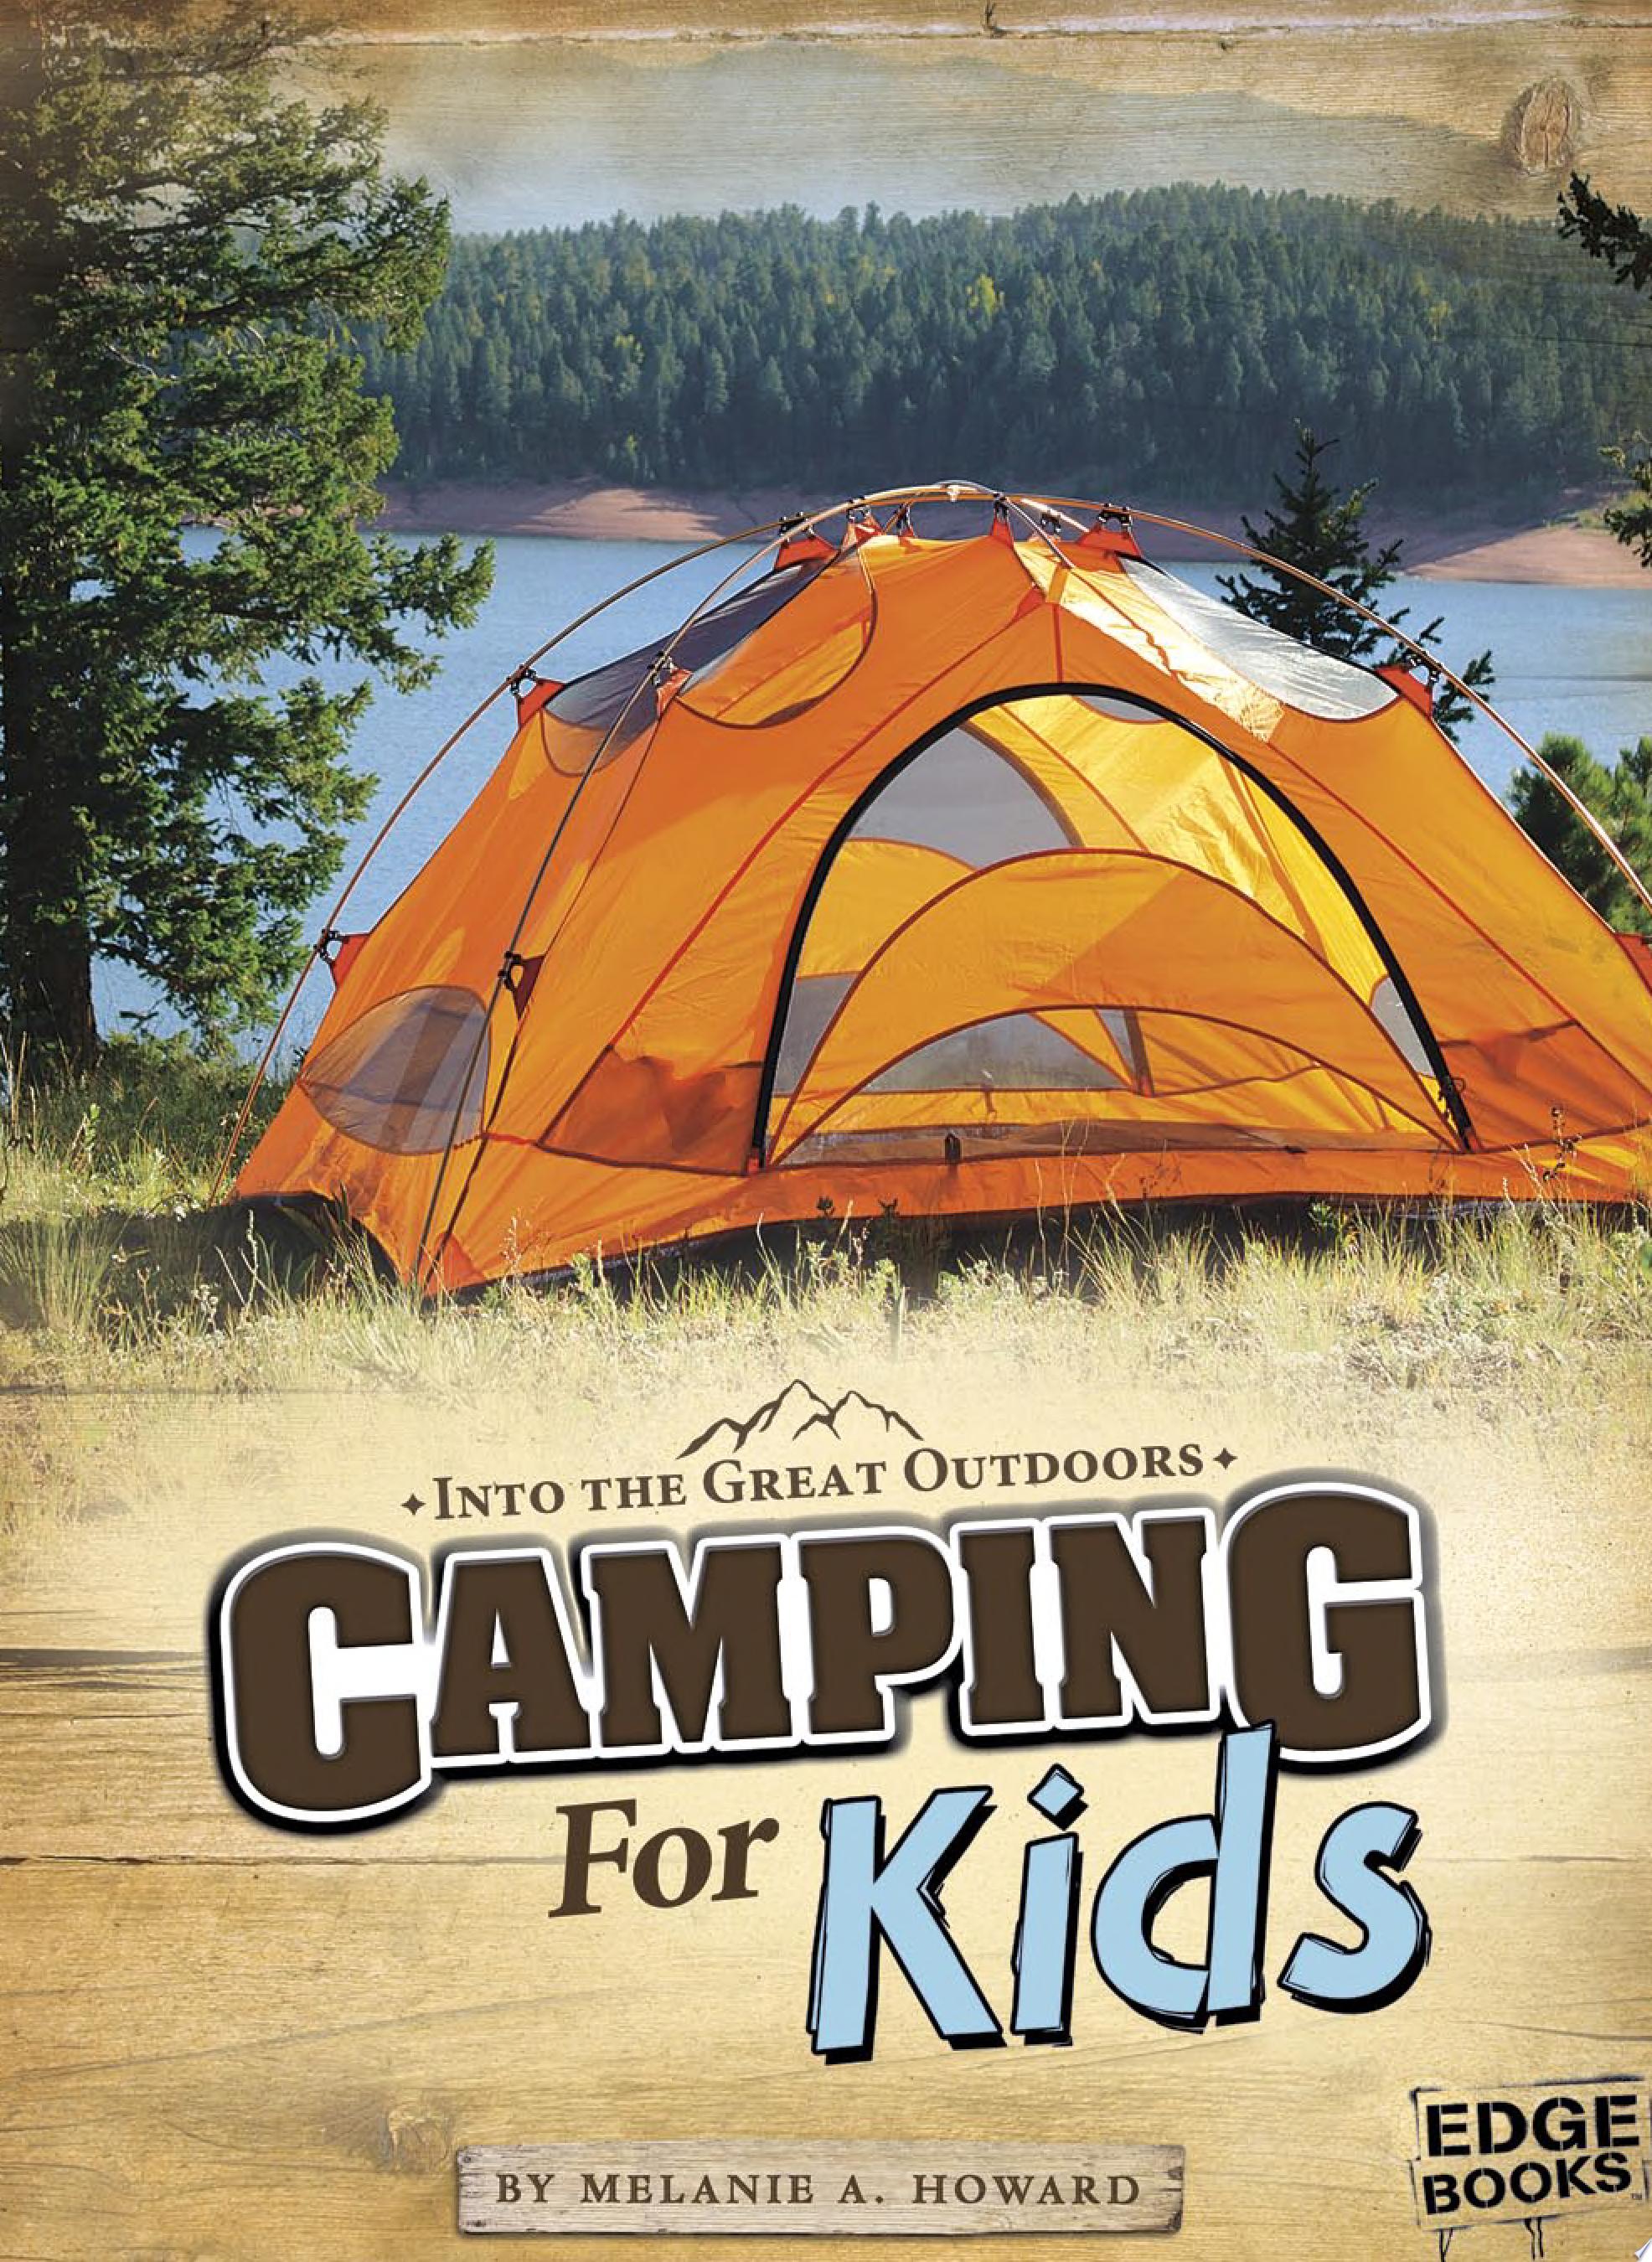 Image for "Camping for Kids"